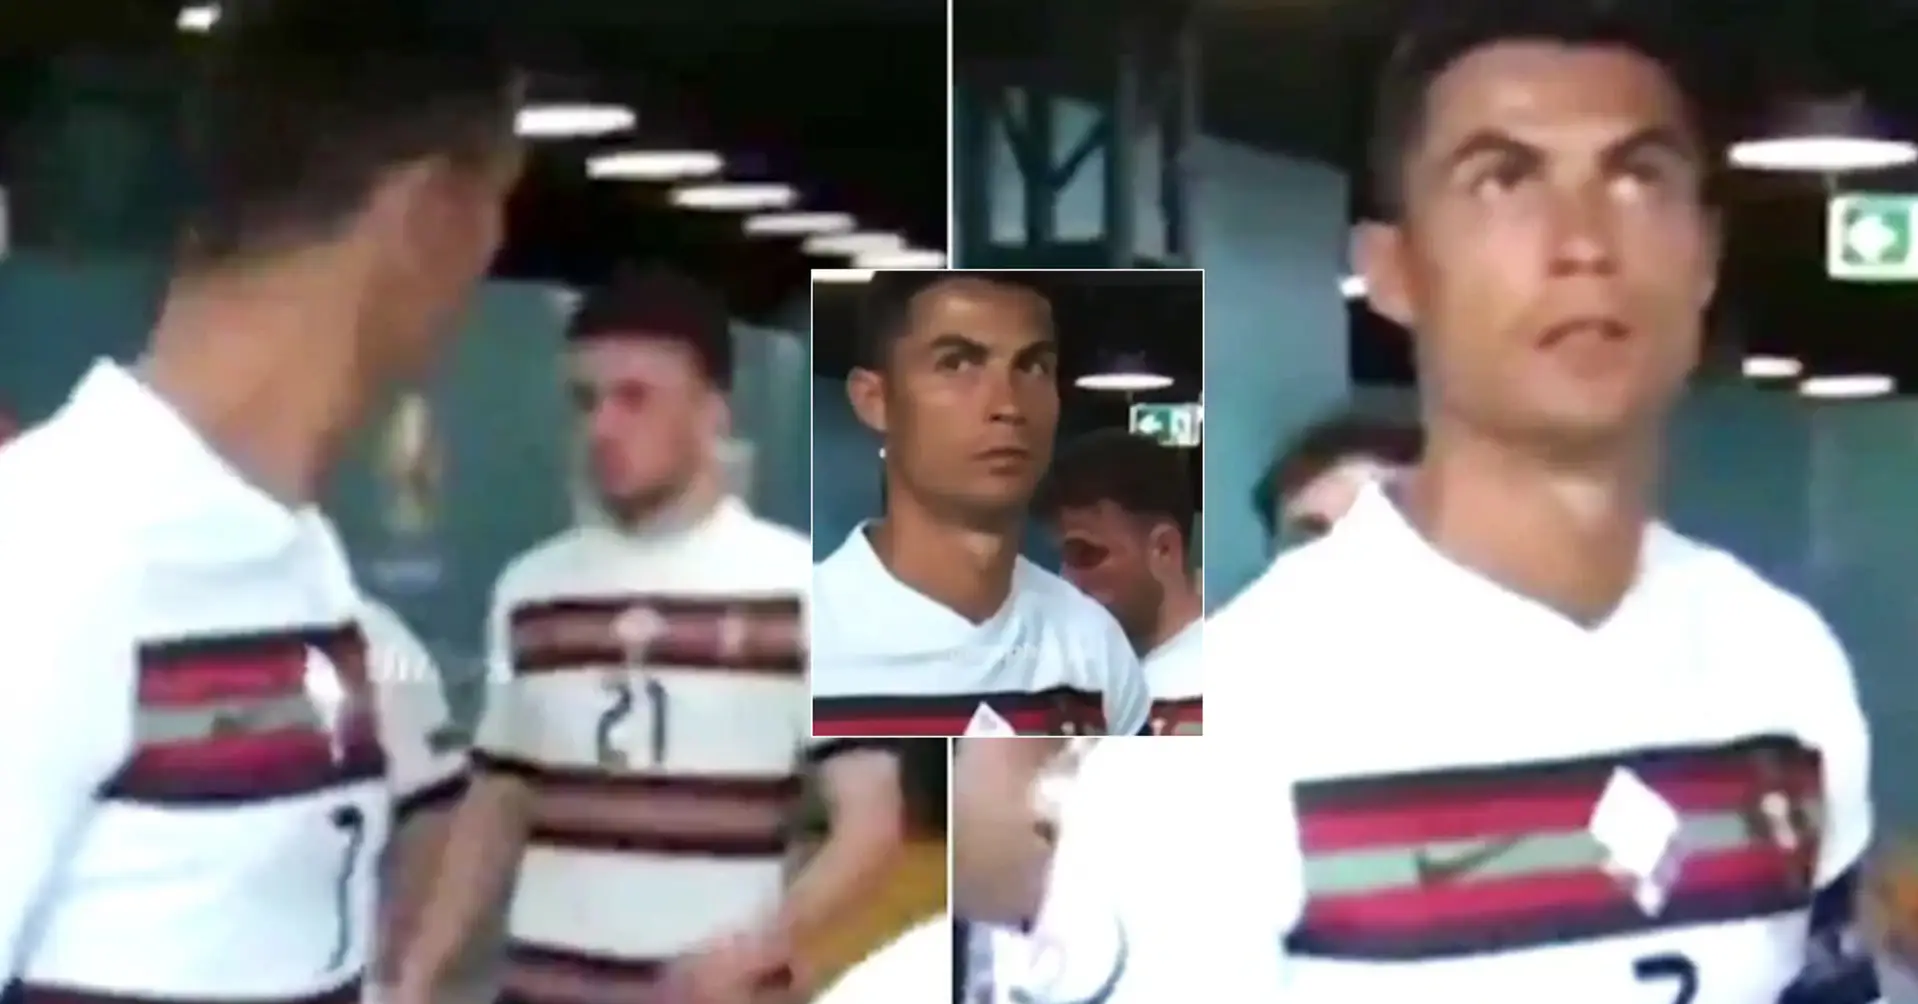 ‘Disgusting’. Cristiano Ronaldo’s angry reaction to Diego Jota in the tunnel caught on camera